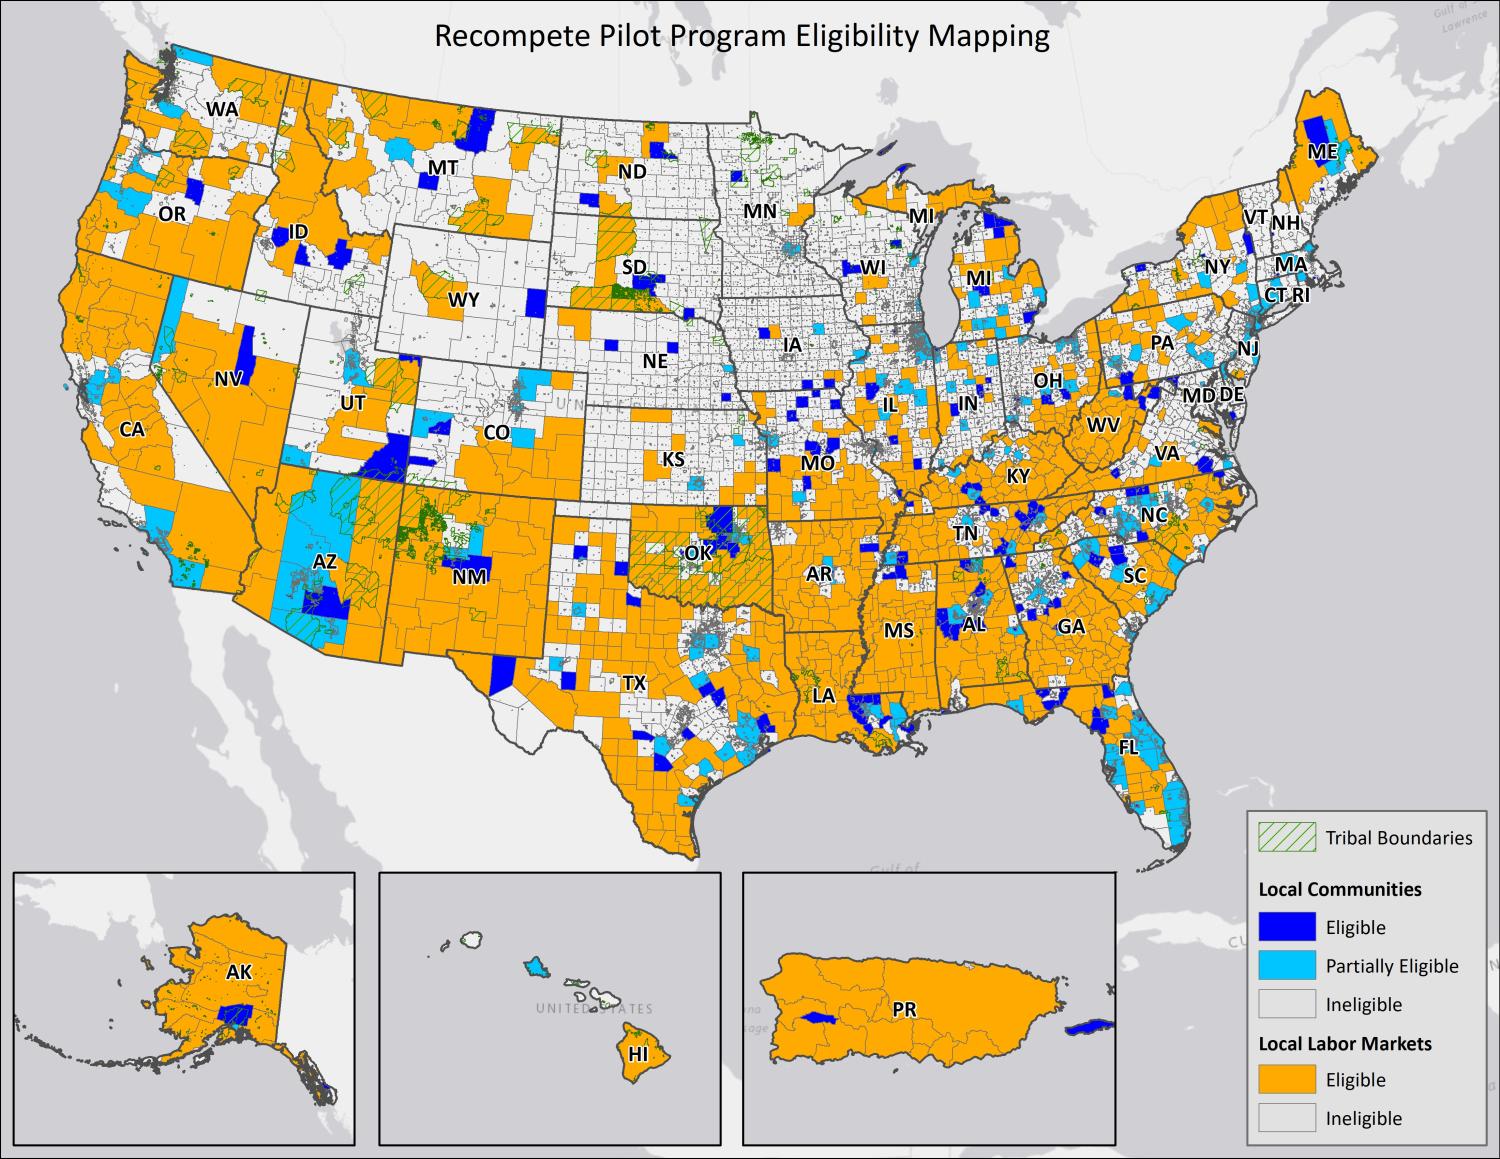 Recompete Pilot Program Eligibility Mapping